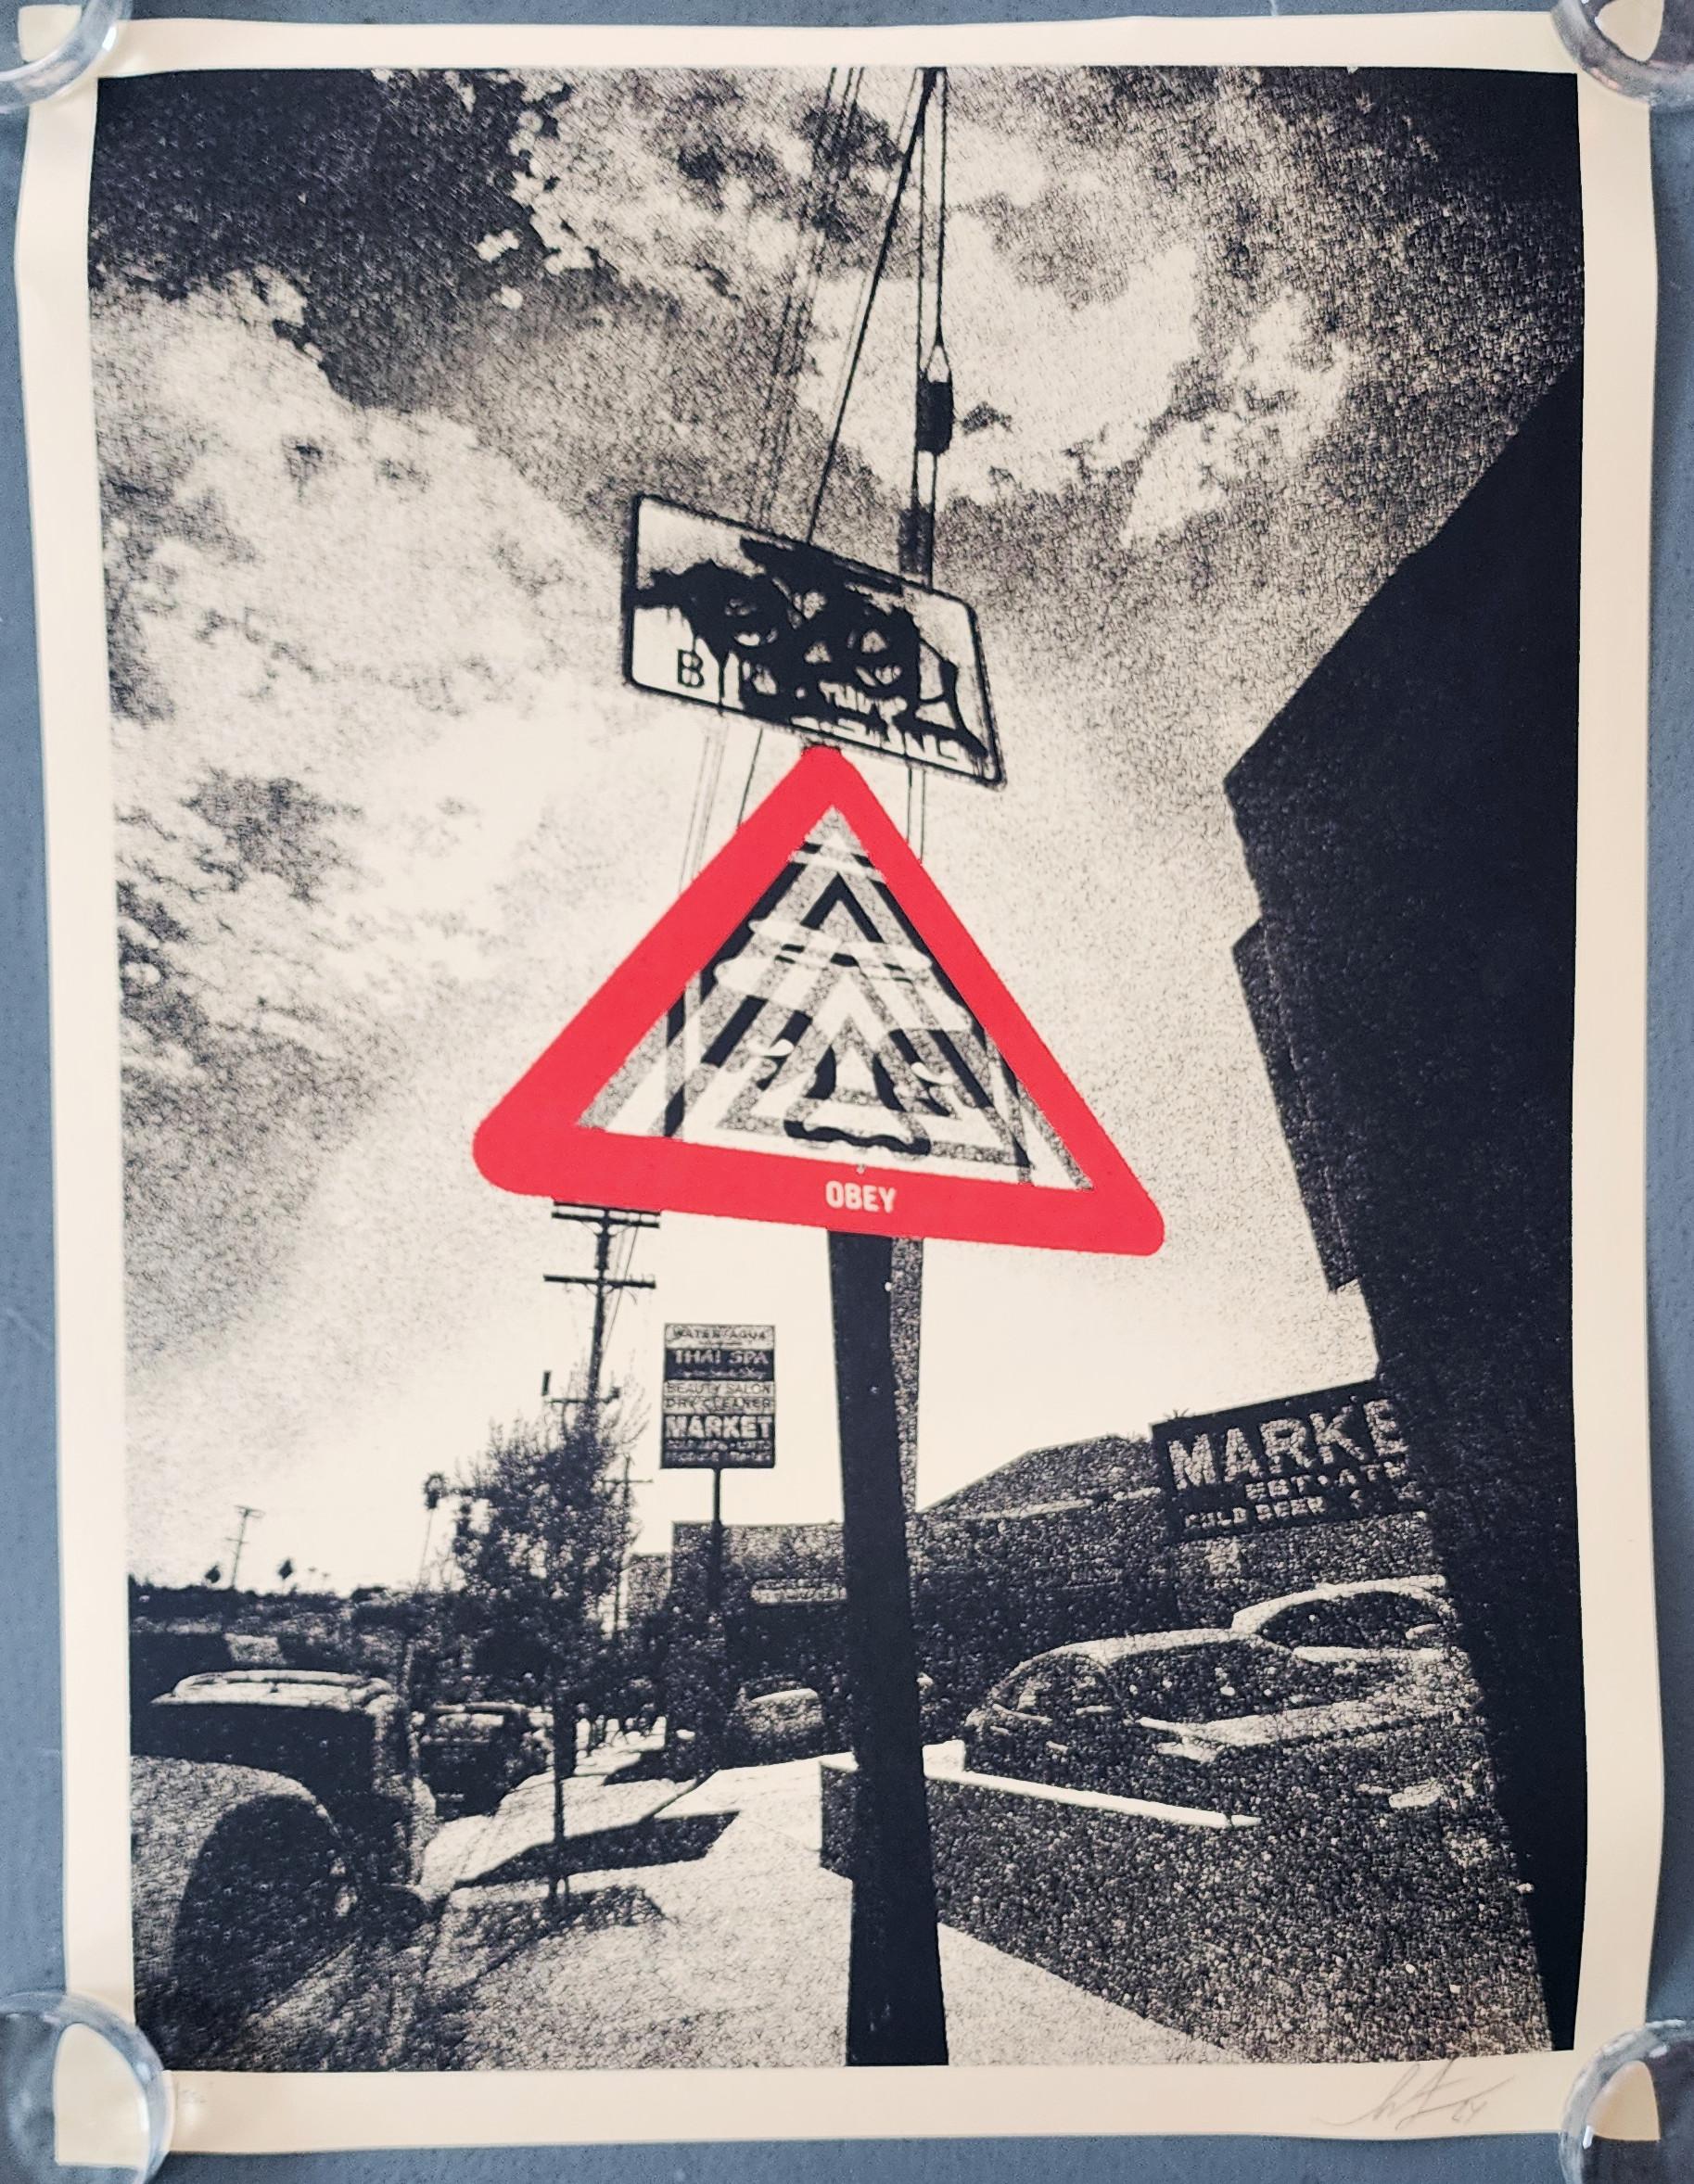 Shepard Fairey
Warning Sign (Disrupt, Provoke, Don’t Ignore the Warning Signs)
Screen print on thick cream Speckletone paper
Year: 2024
Size: 24x18 inches
Edition: 550
Signed, dated and numbered by hand
COA provided

Tags: Disrupt, Provoke, Don’t